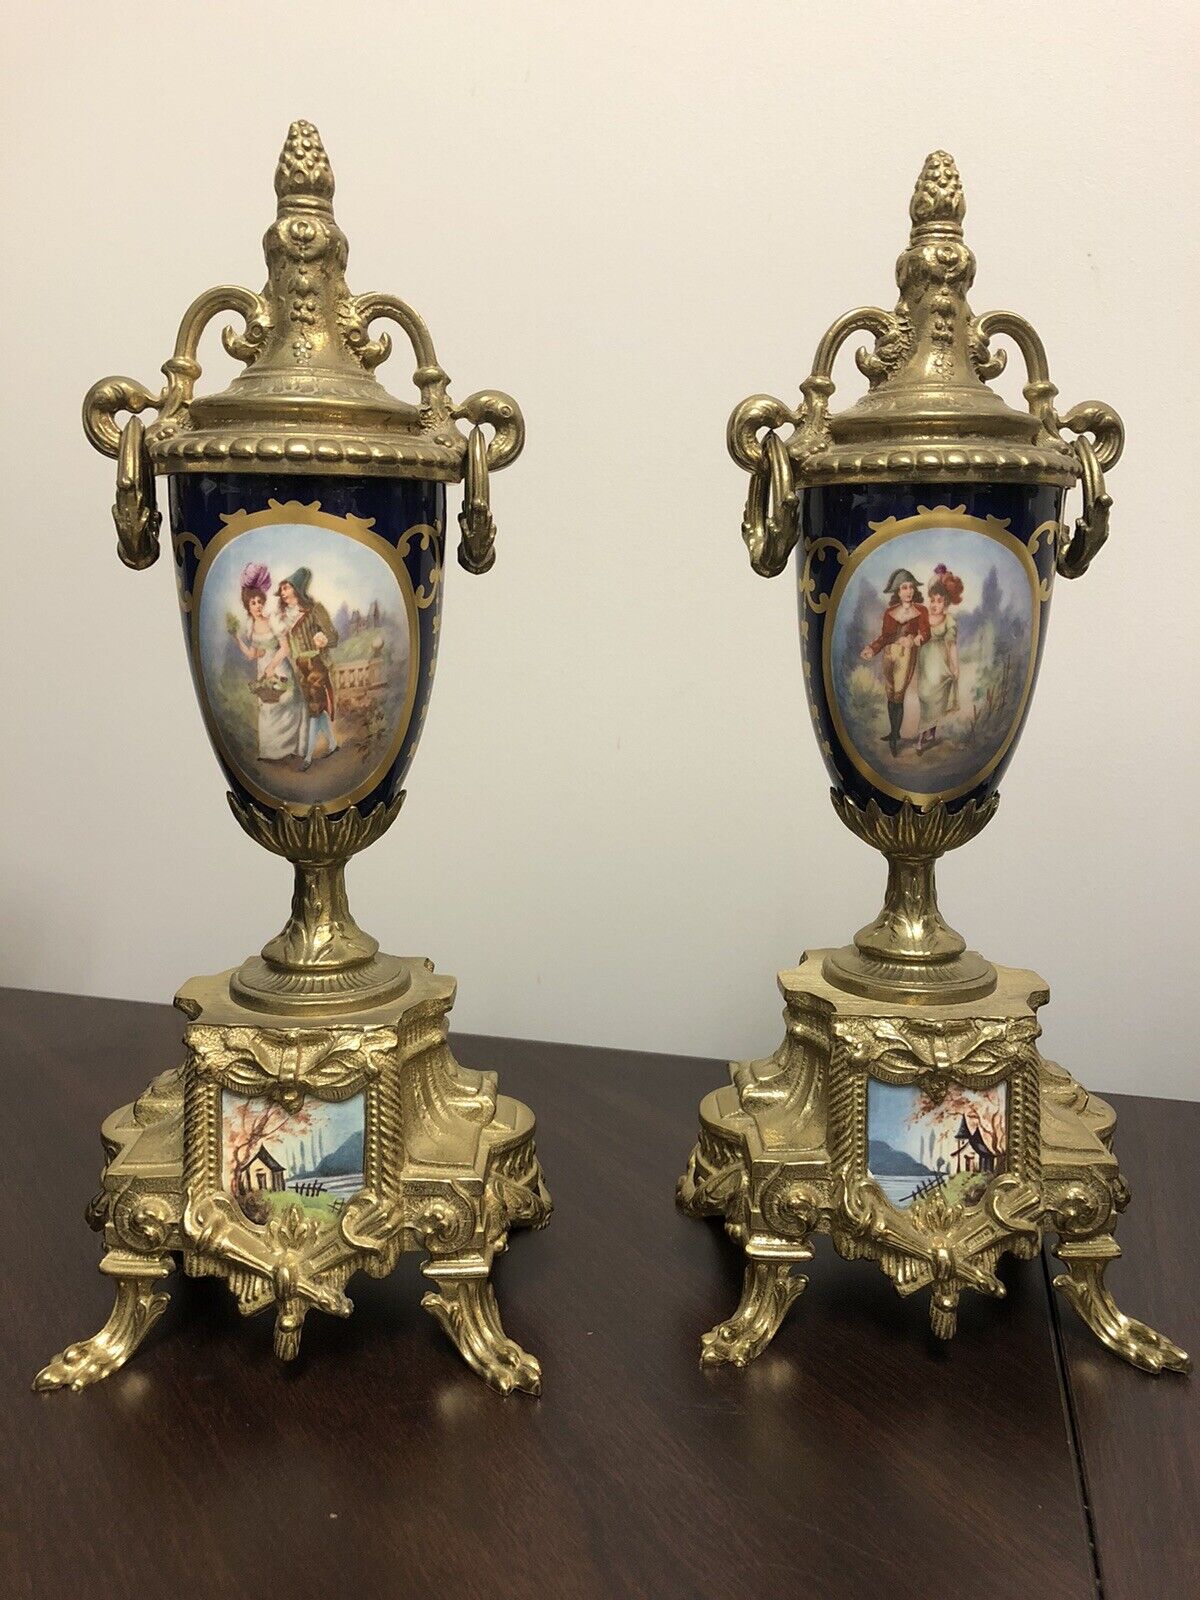 Vtg Pair of Sevres Style Gilt Metal Porcelain Urns Italy 20th c. Courting Scenes